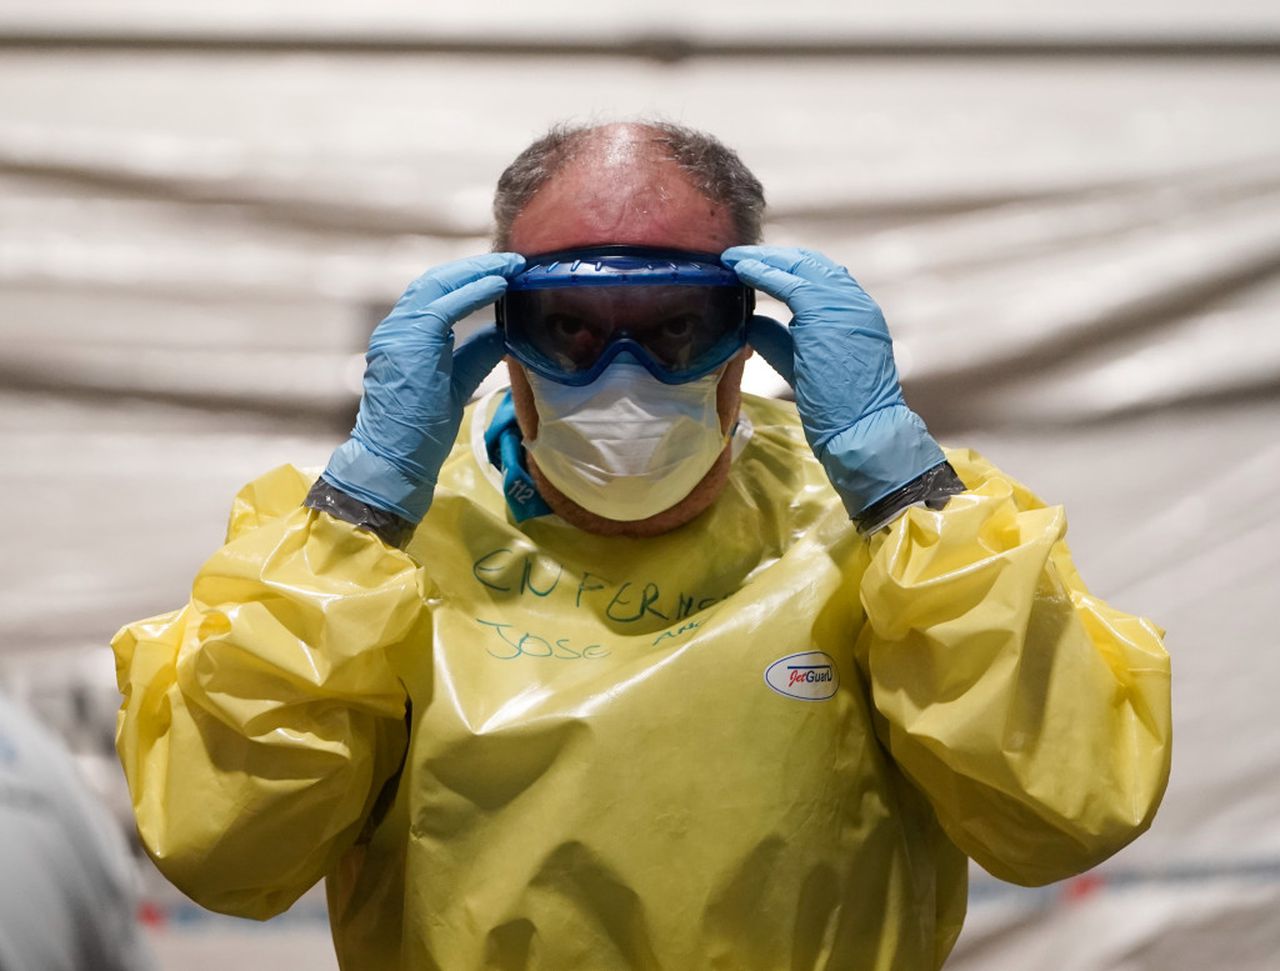 Photos: Fighting the coronavirus abroad in Italy and Spain